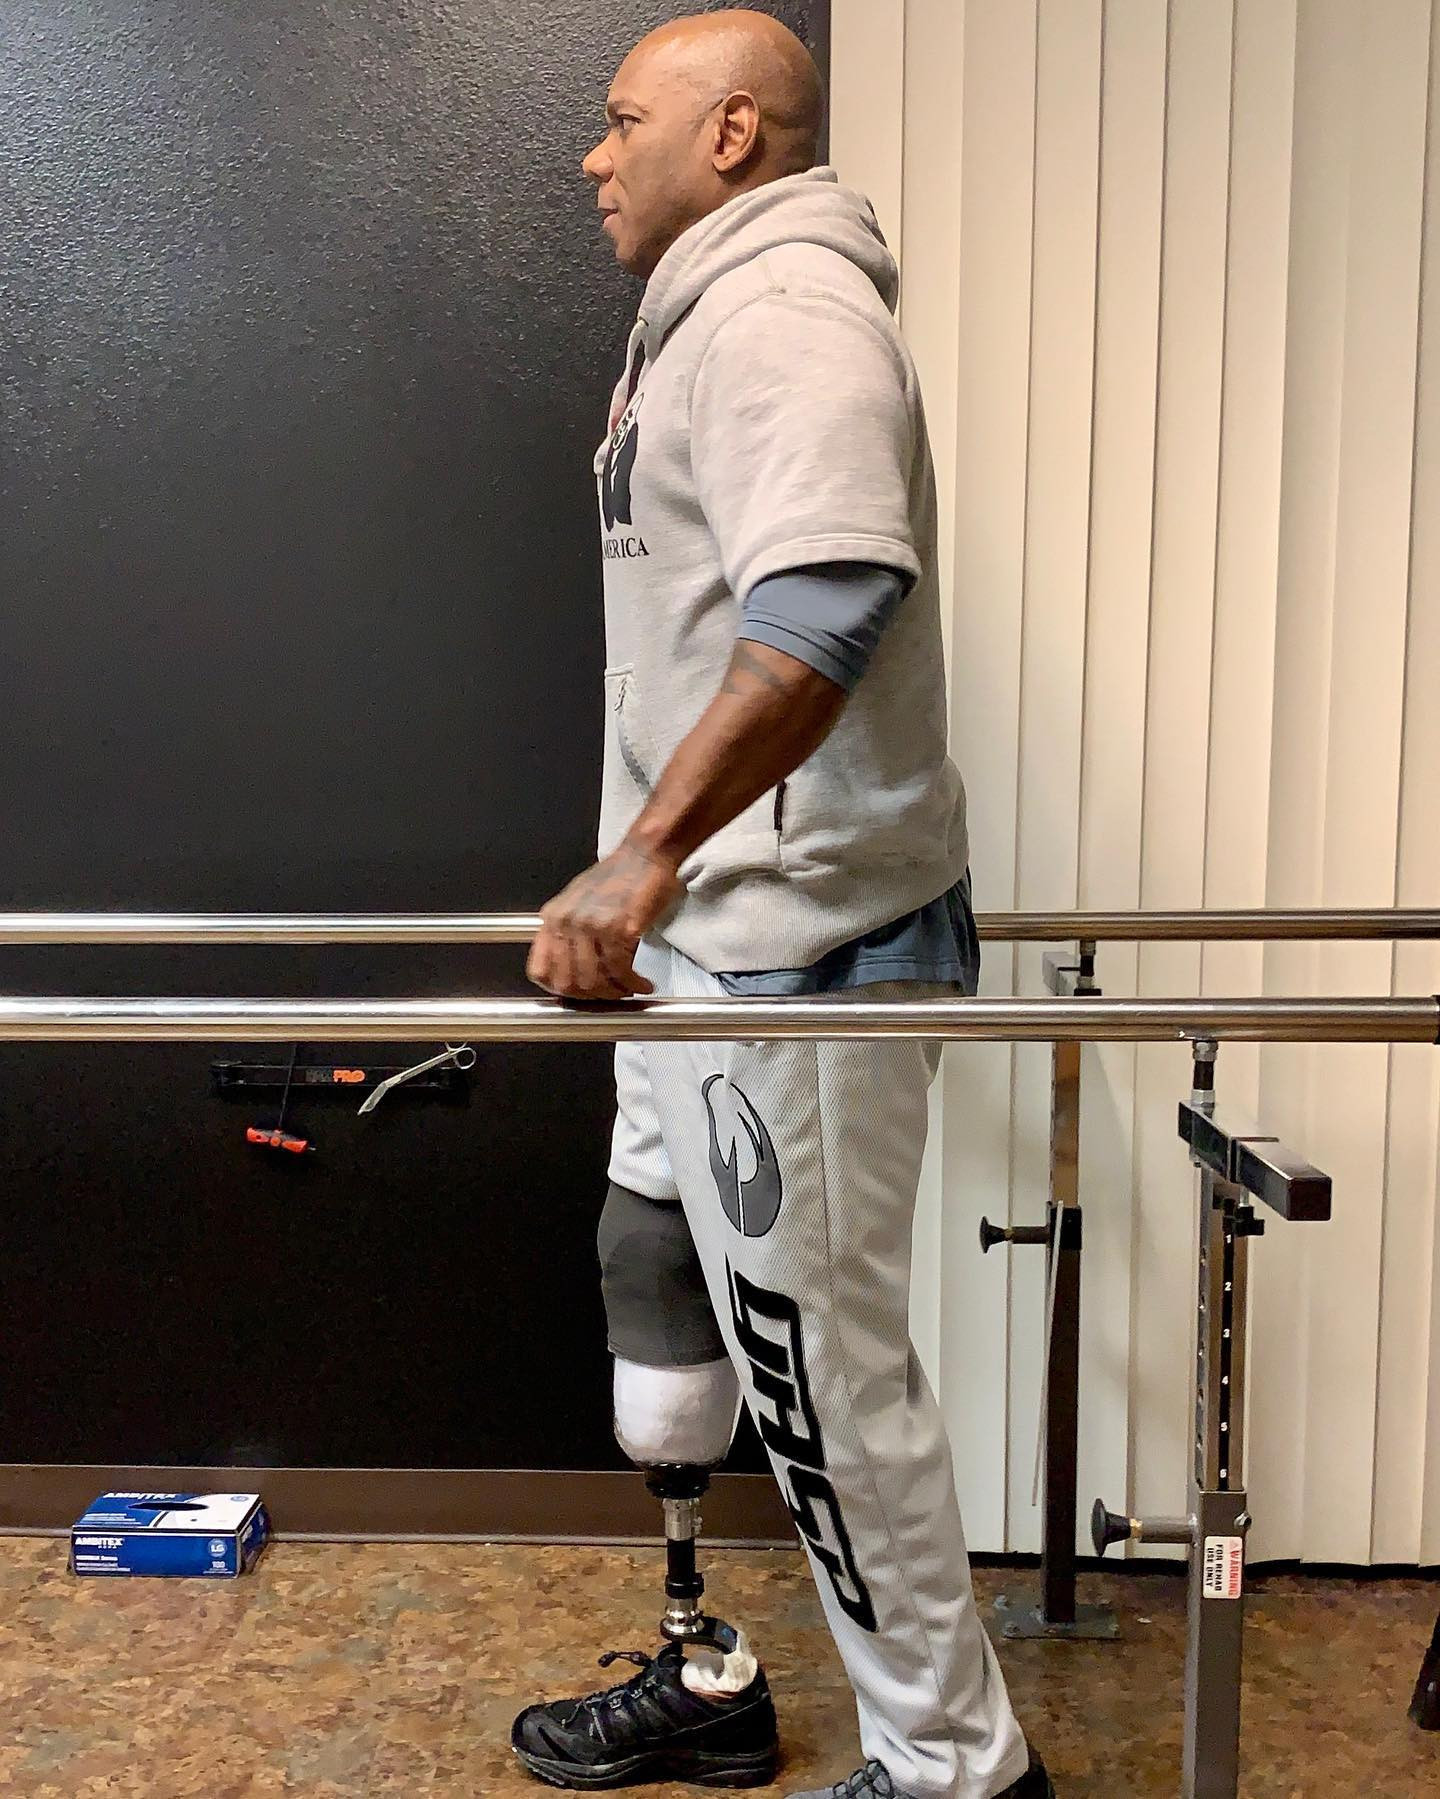 American IFBB legend Flex Wheeler began his recovery after having part of his leg amputated ©Facebook